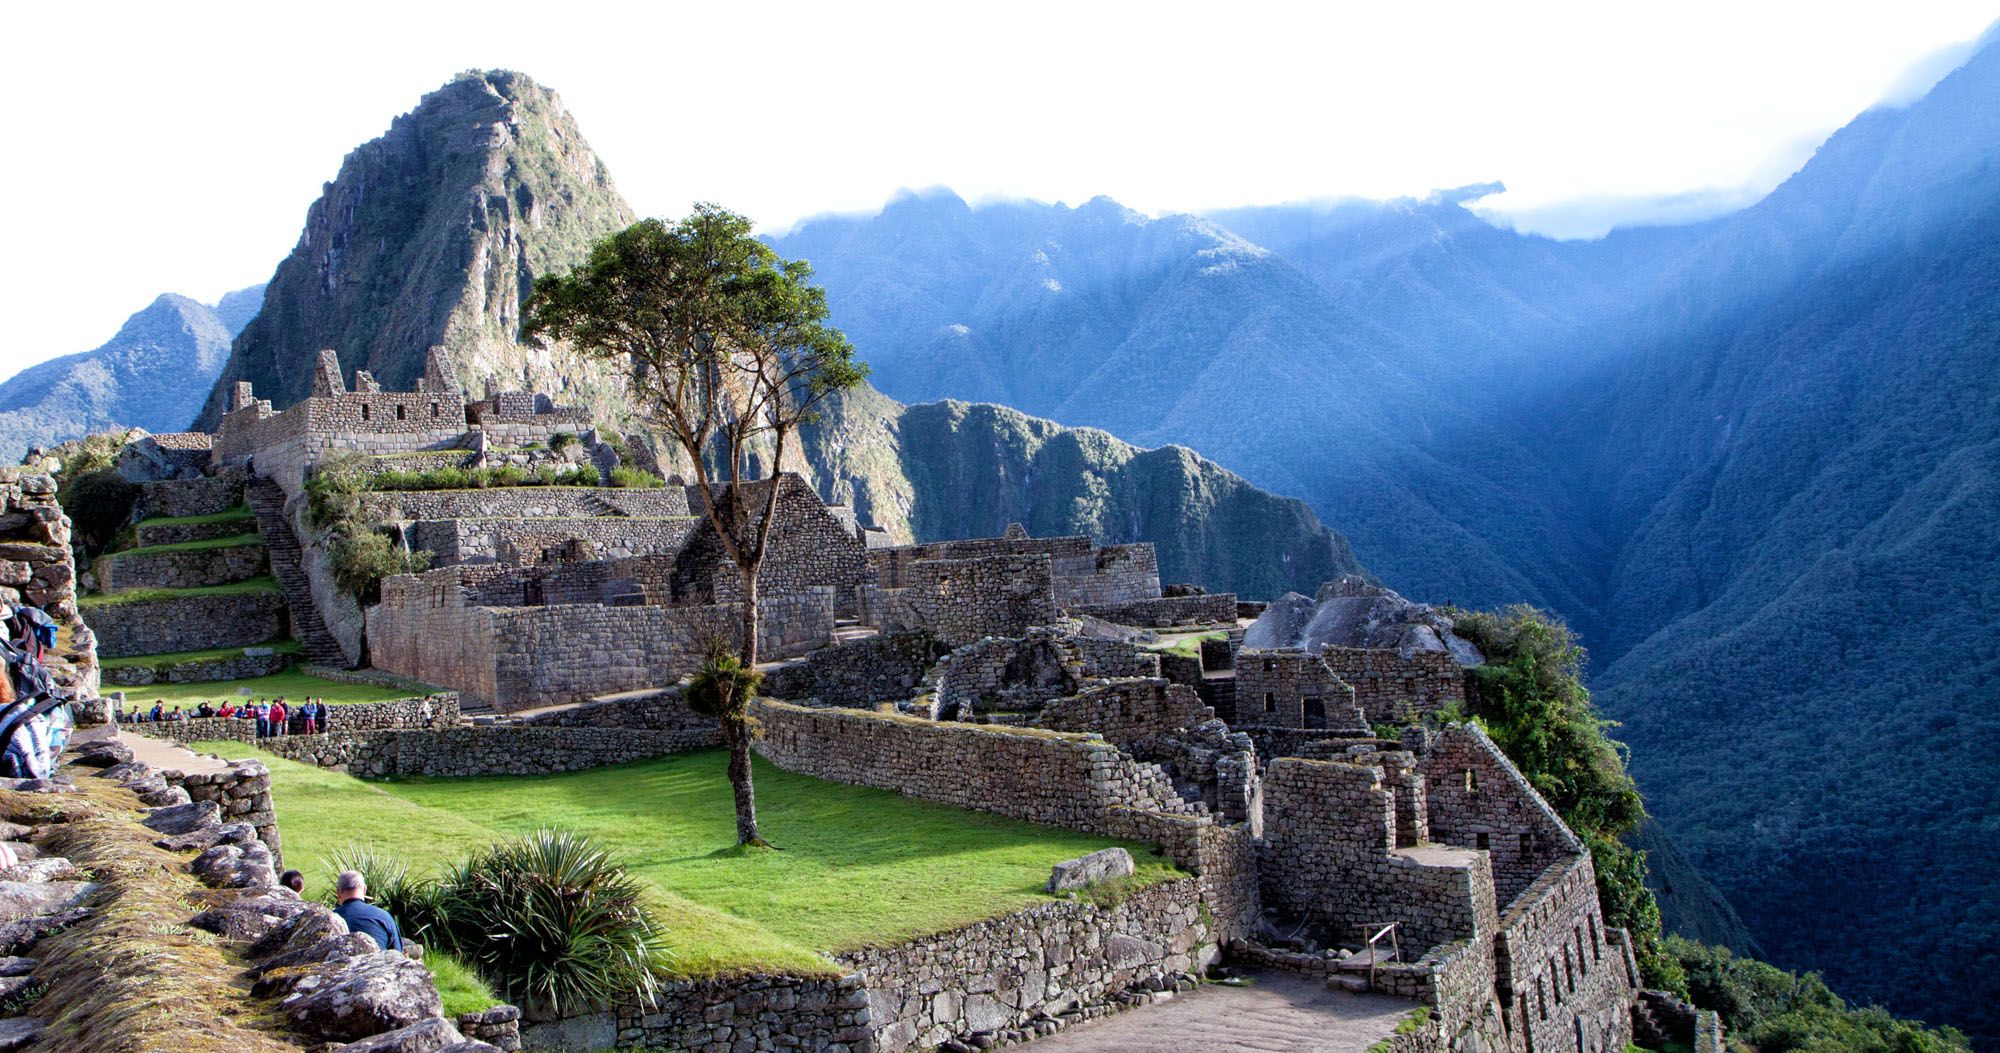 Featured image for “Magical and Mystical Machu Picchu in Photos”